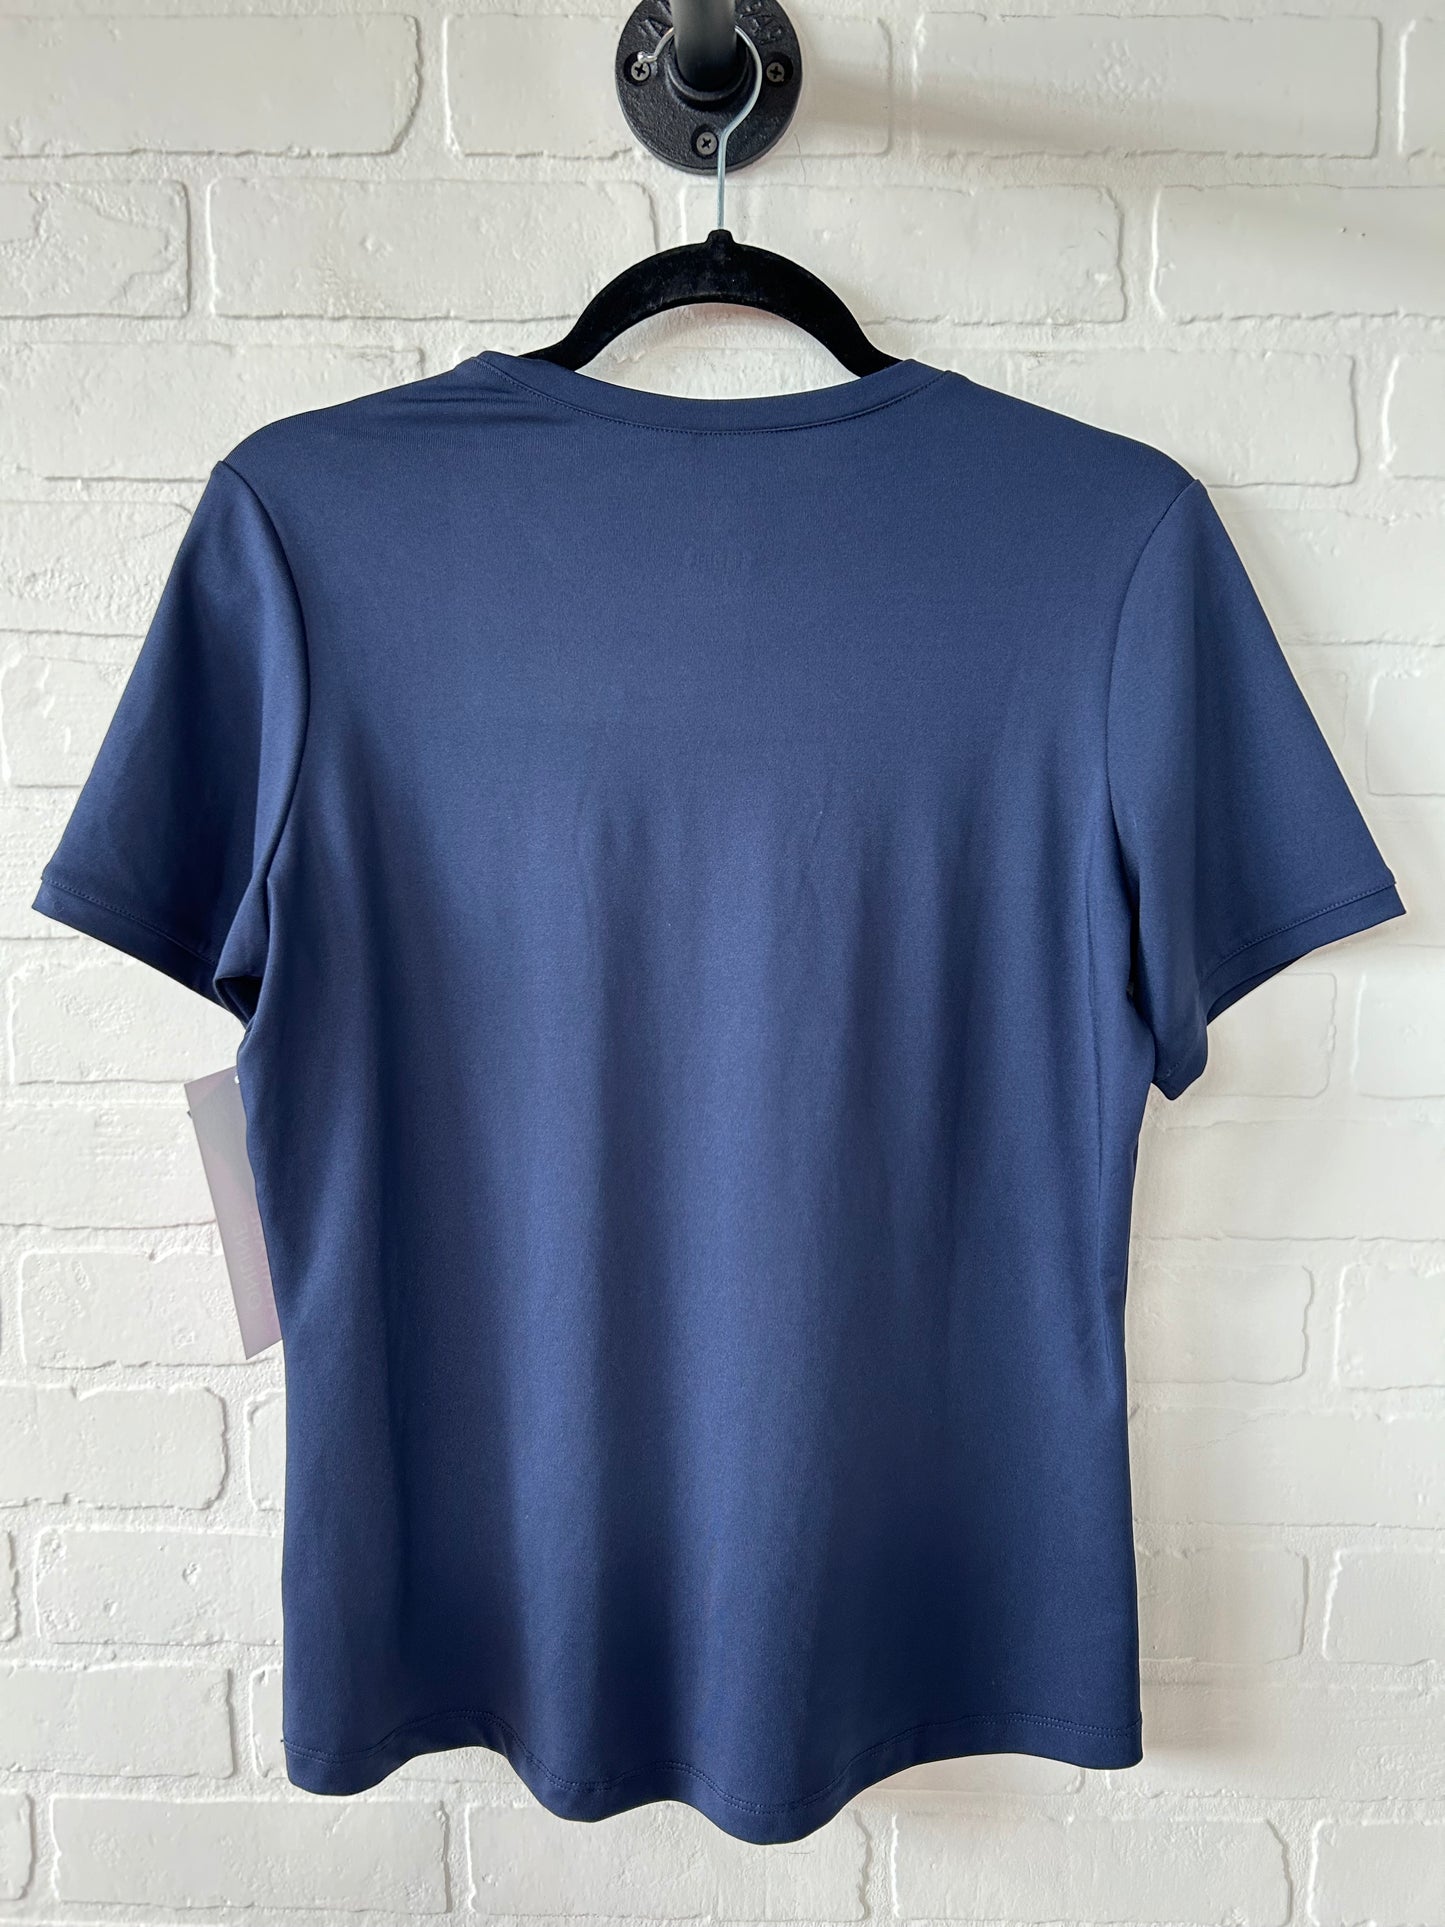 Athletic Top Short Sleeve By Clothes Mentor  Size: M